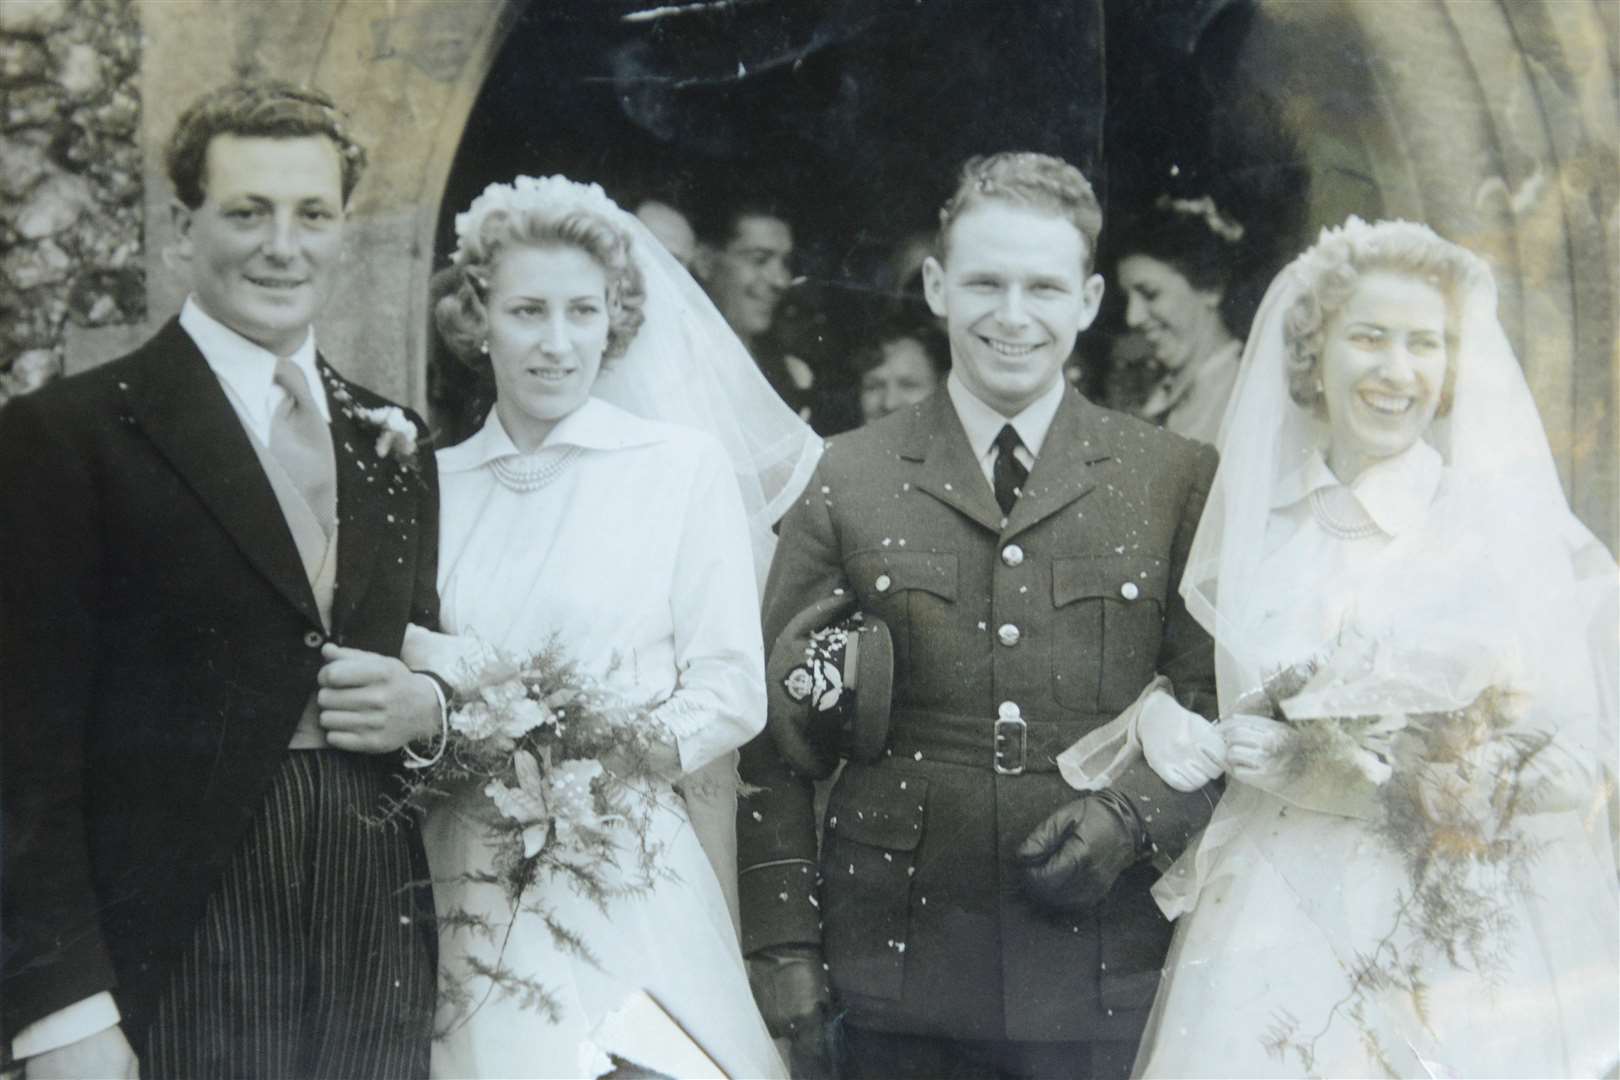 Jackie and Jill on their wedding day with husbands Ronald Upton and John White